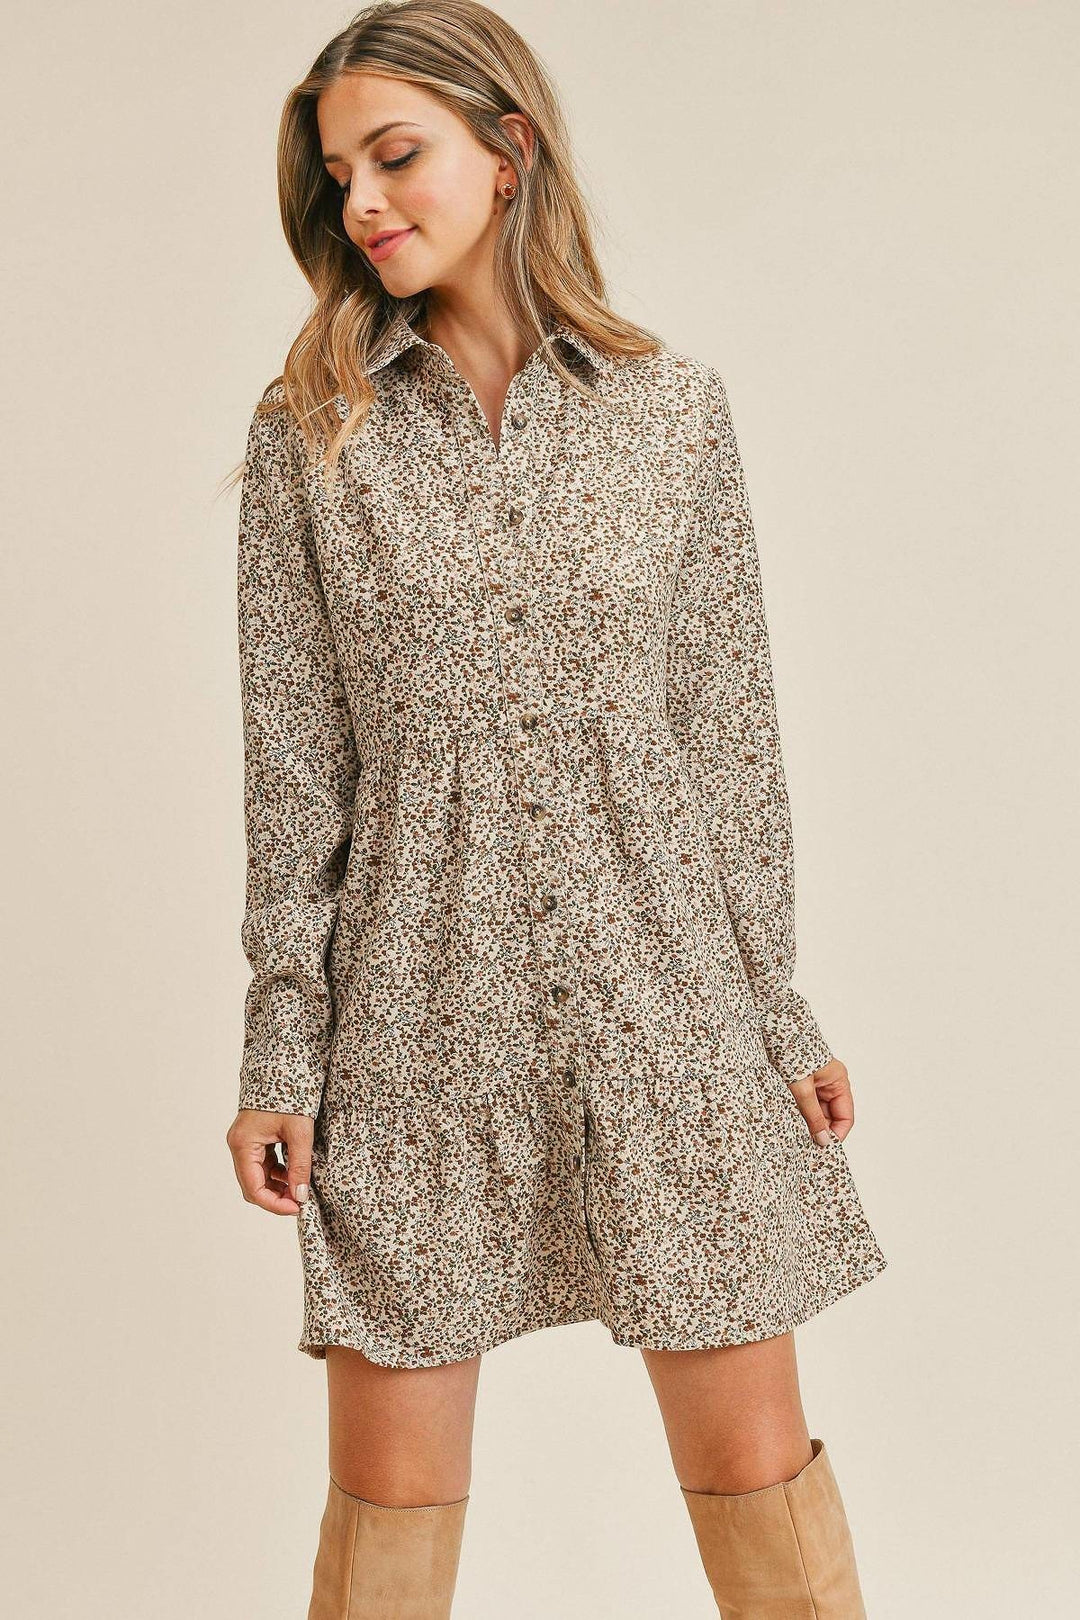 Corduroy Printed Button Down Front Collar Long Sleeve Dress in Taupe